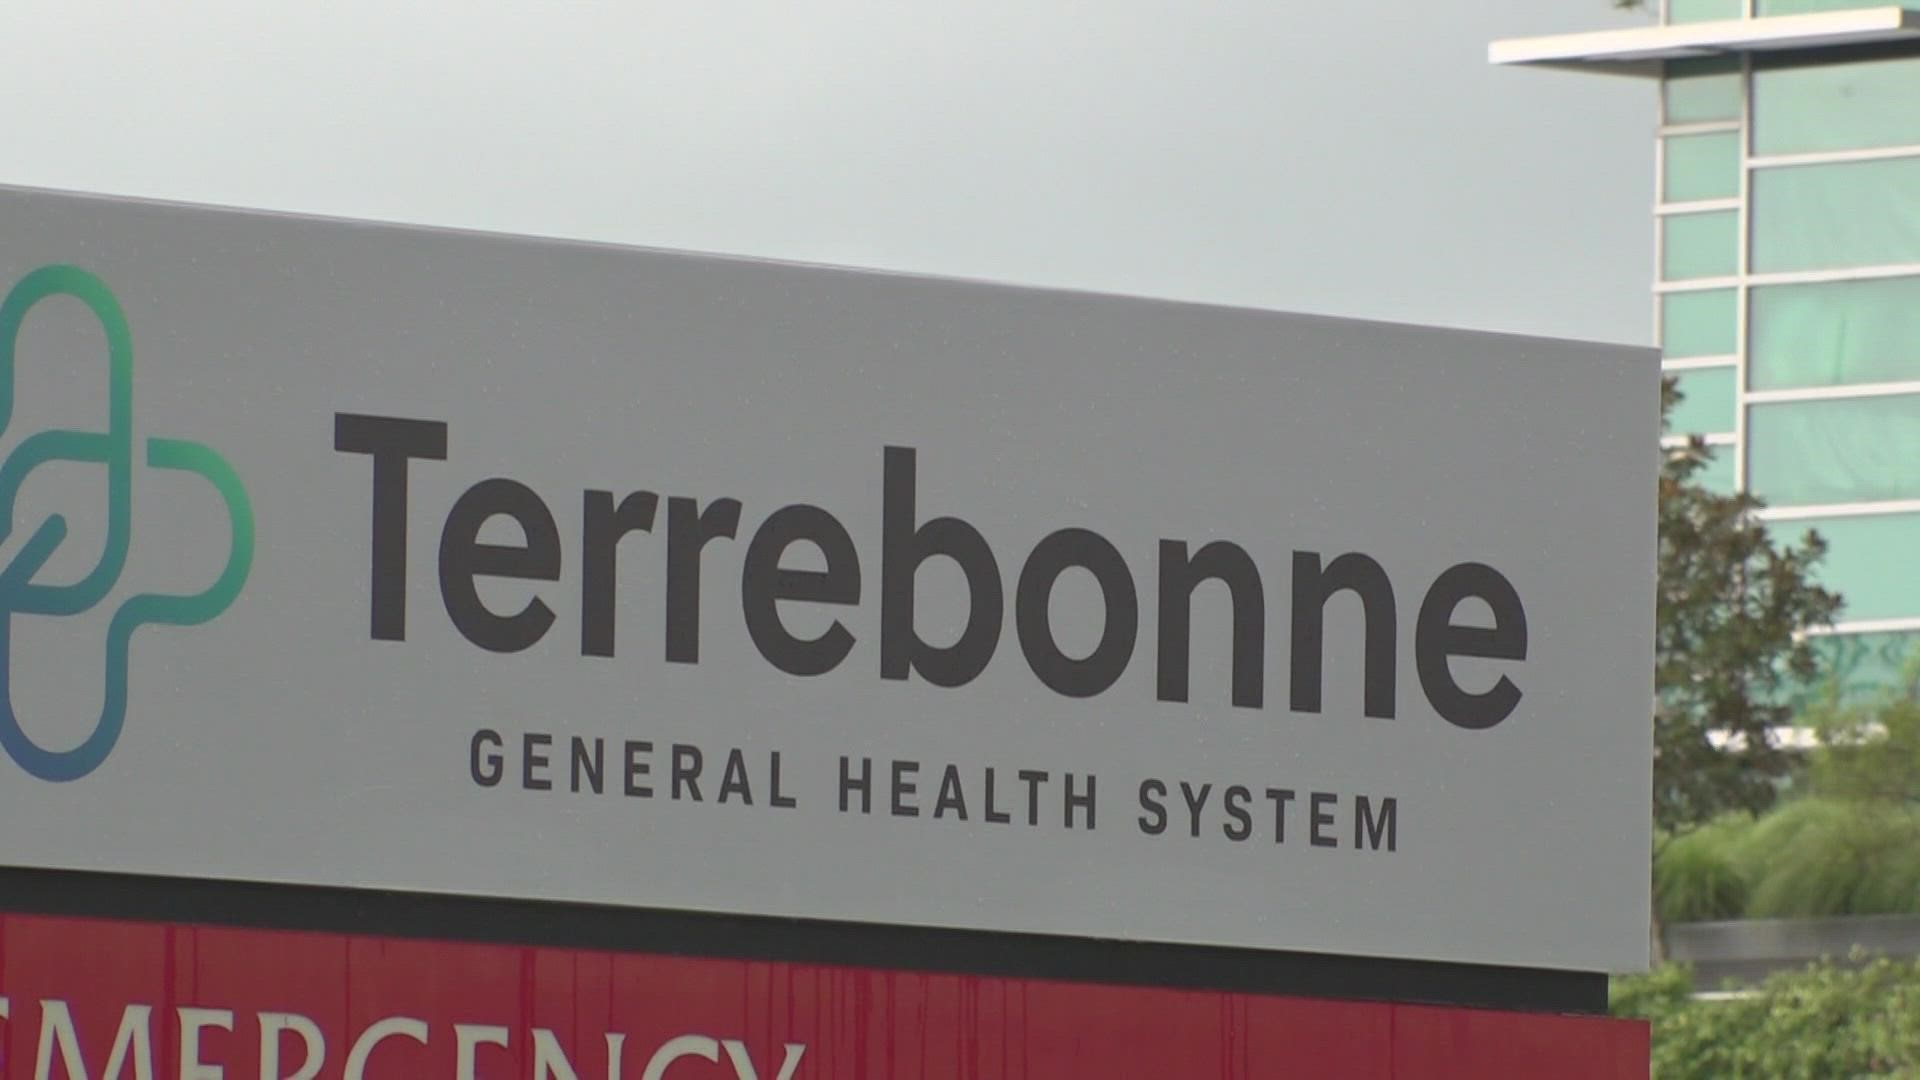 Louisiana health officials said that the bayou region of the state is getting hard hit with the latest delta variant as hospital run out of room.